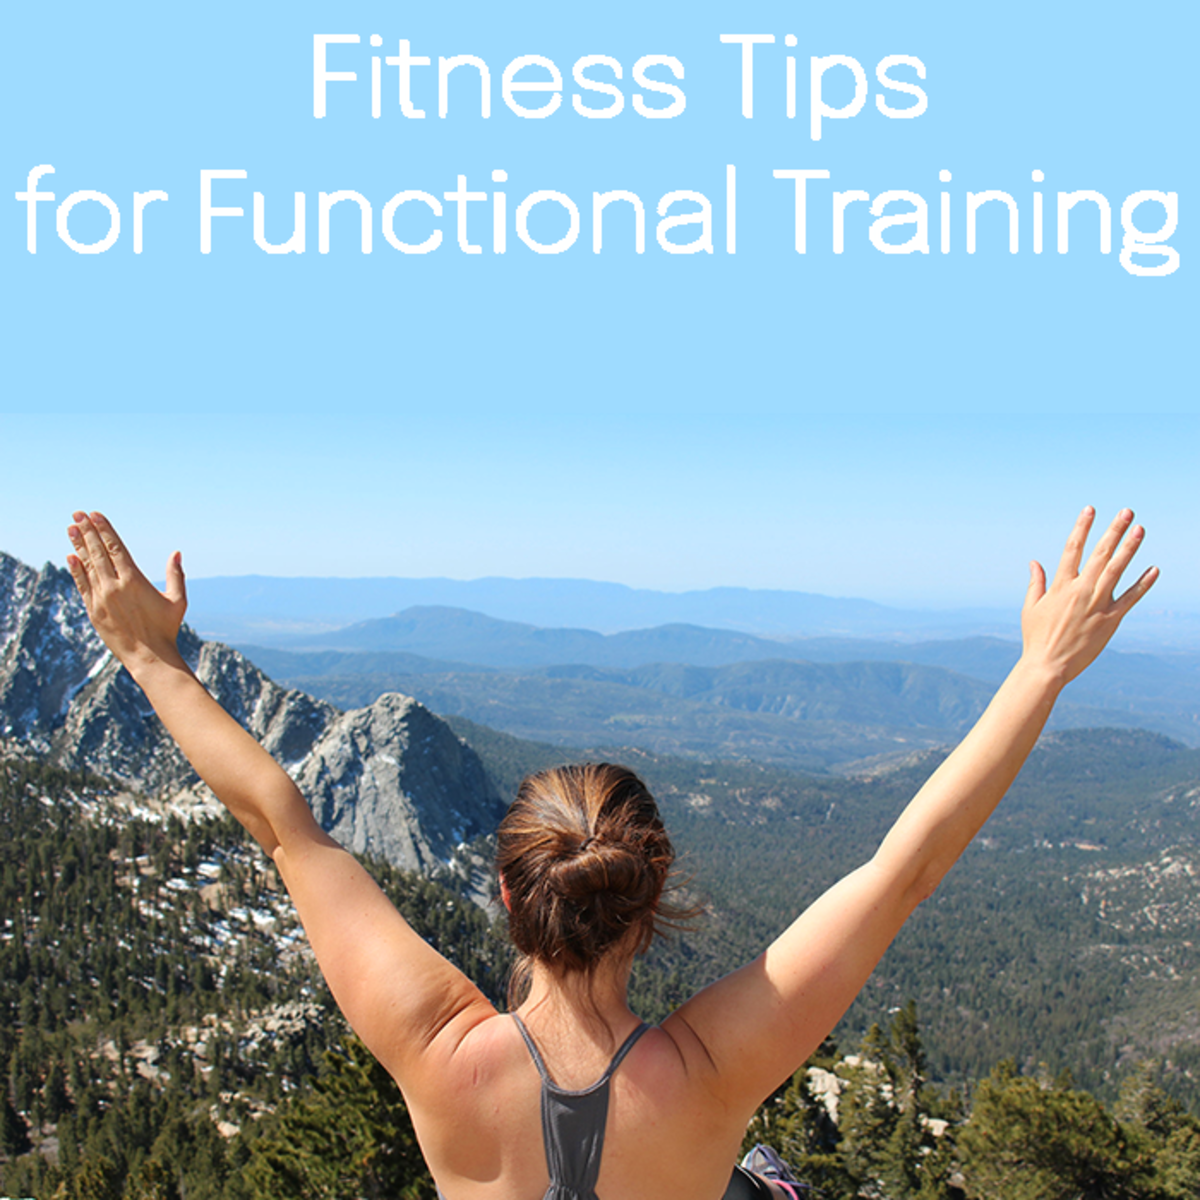 7 Fitness Tips for Functional Training